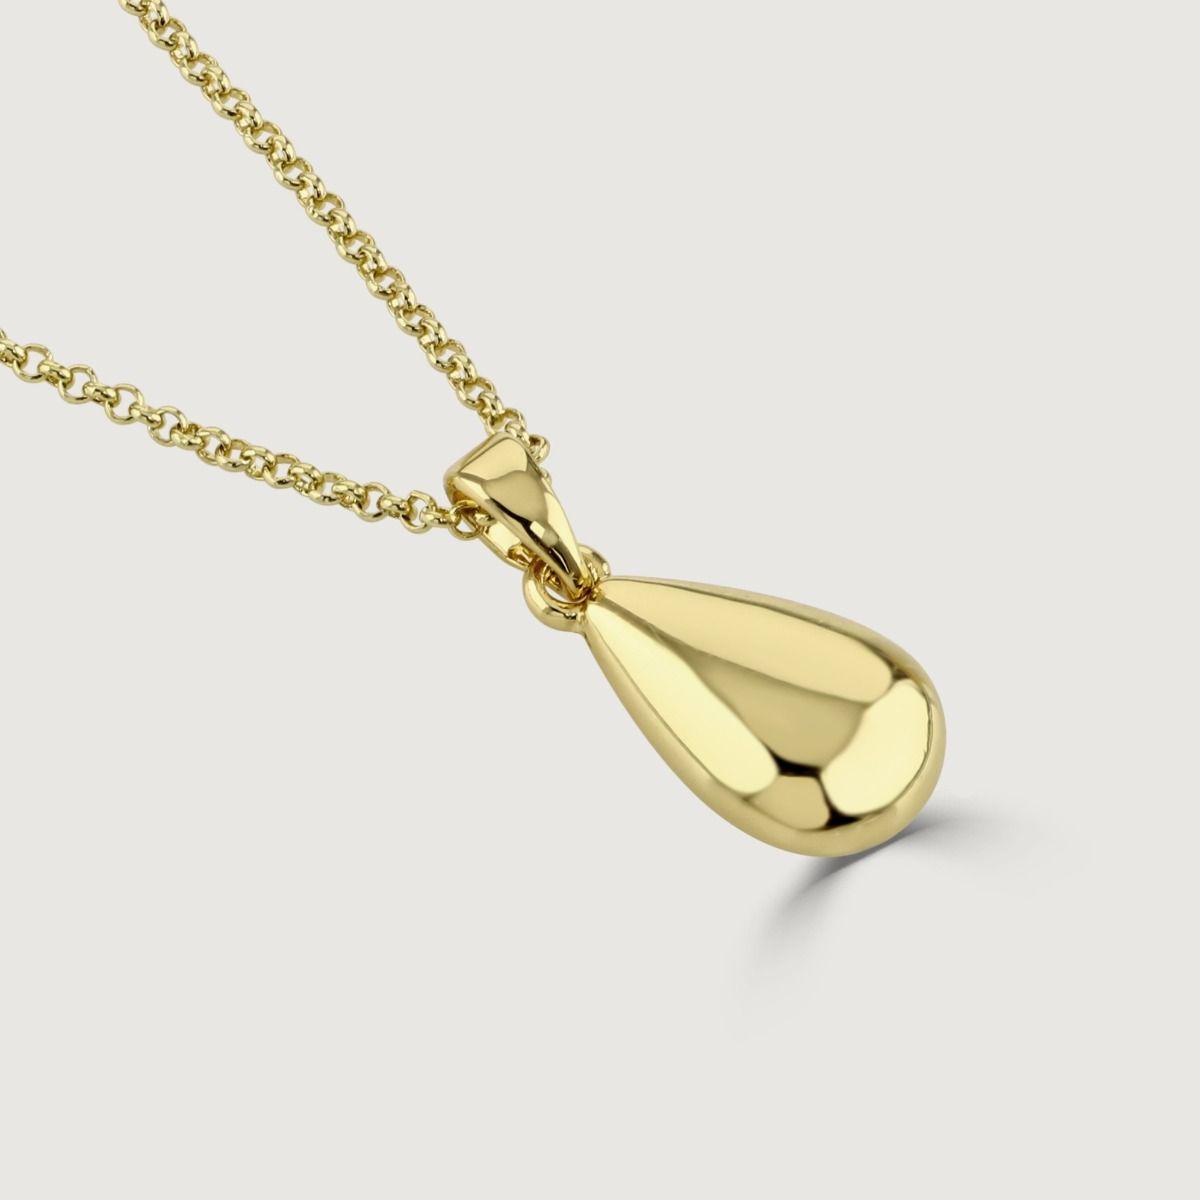 The Tear Drop Gold Polished Pendant is a stunning and versatile accessory. With its sleek and polished gold finish, this pendant showcases a timeless elegance. The tear-drop shape adds a touch of grace and sophistication. 